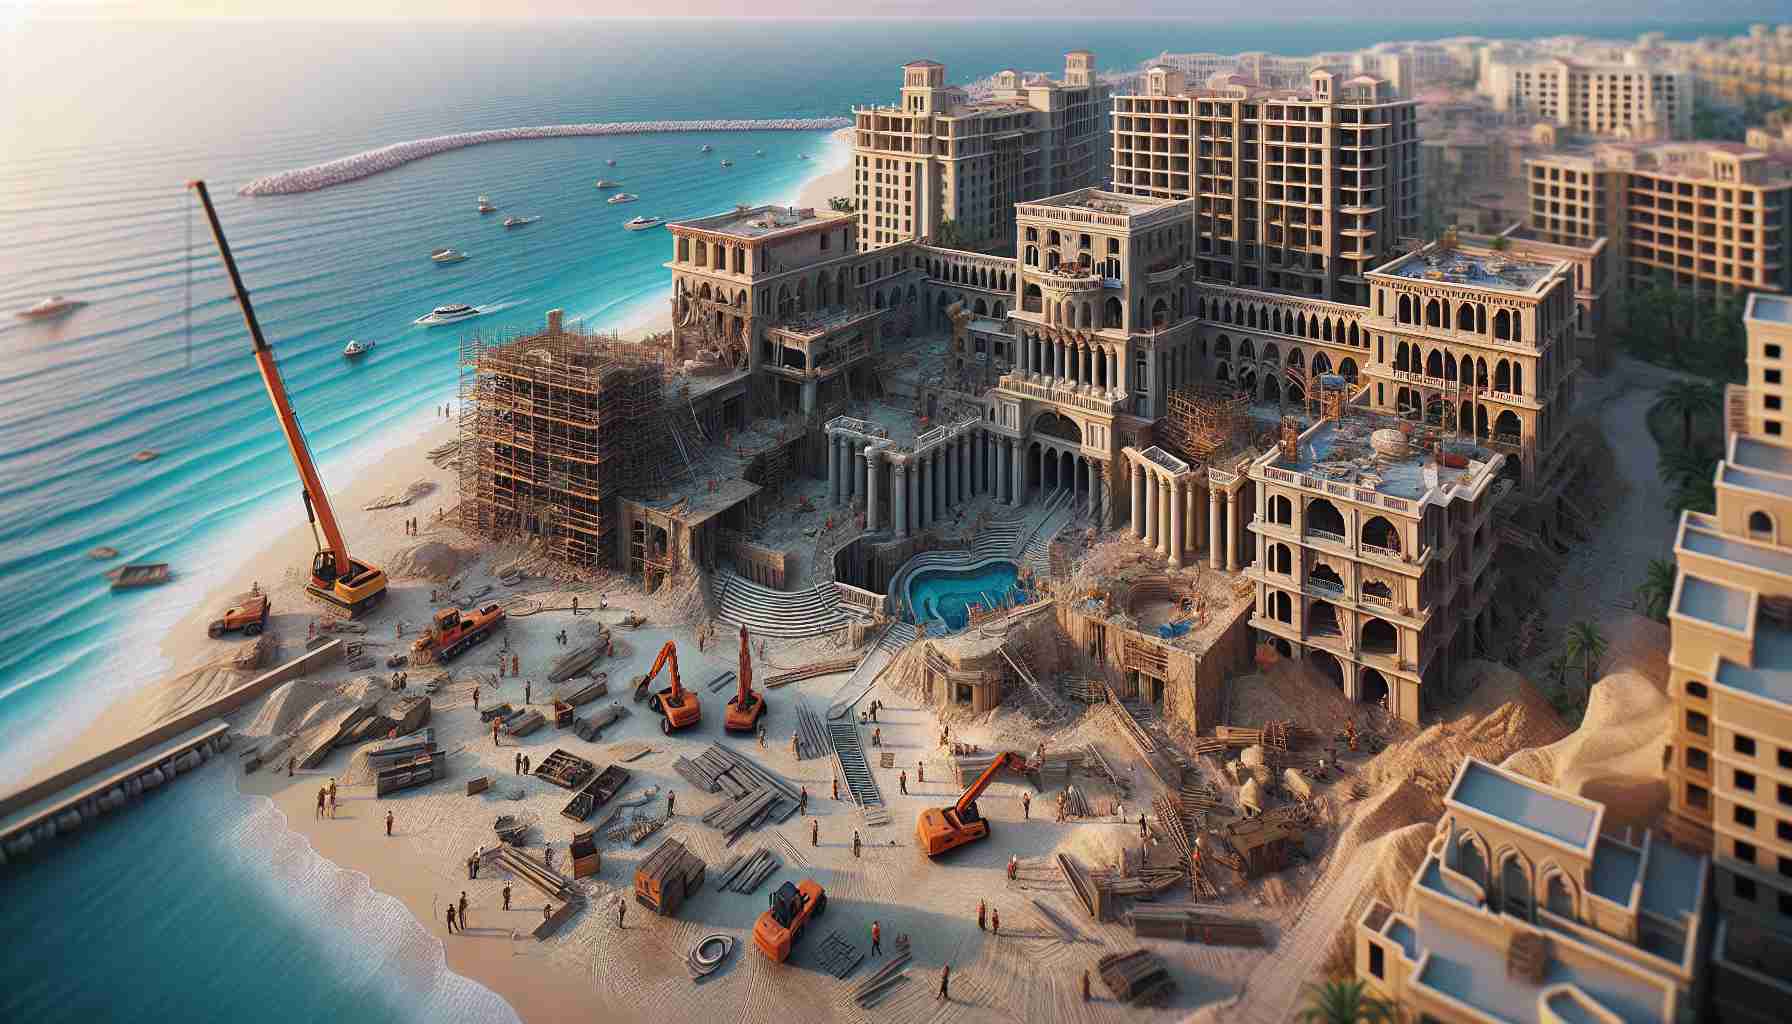 High-definition, realistic image of a major transformation taking place at a well-known beach resort, with ongoing construction evident. Building structures are in various stages of reconstruction, with workers seen actively involved in the process. The beach and the ocean beyond add to the stunning backdrop.